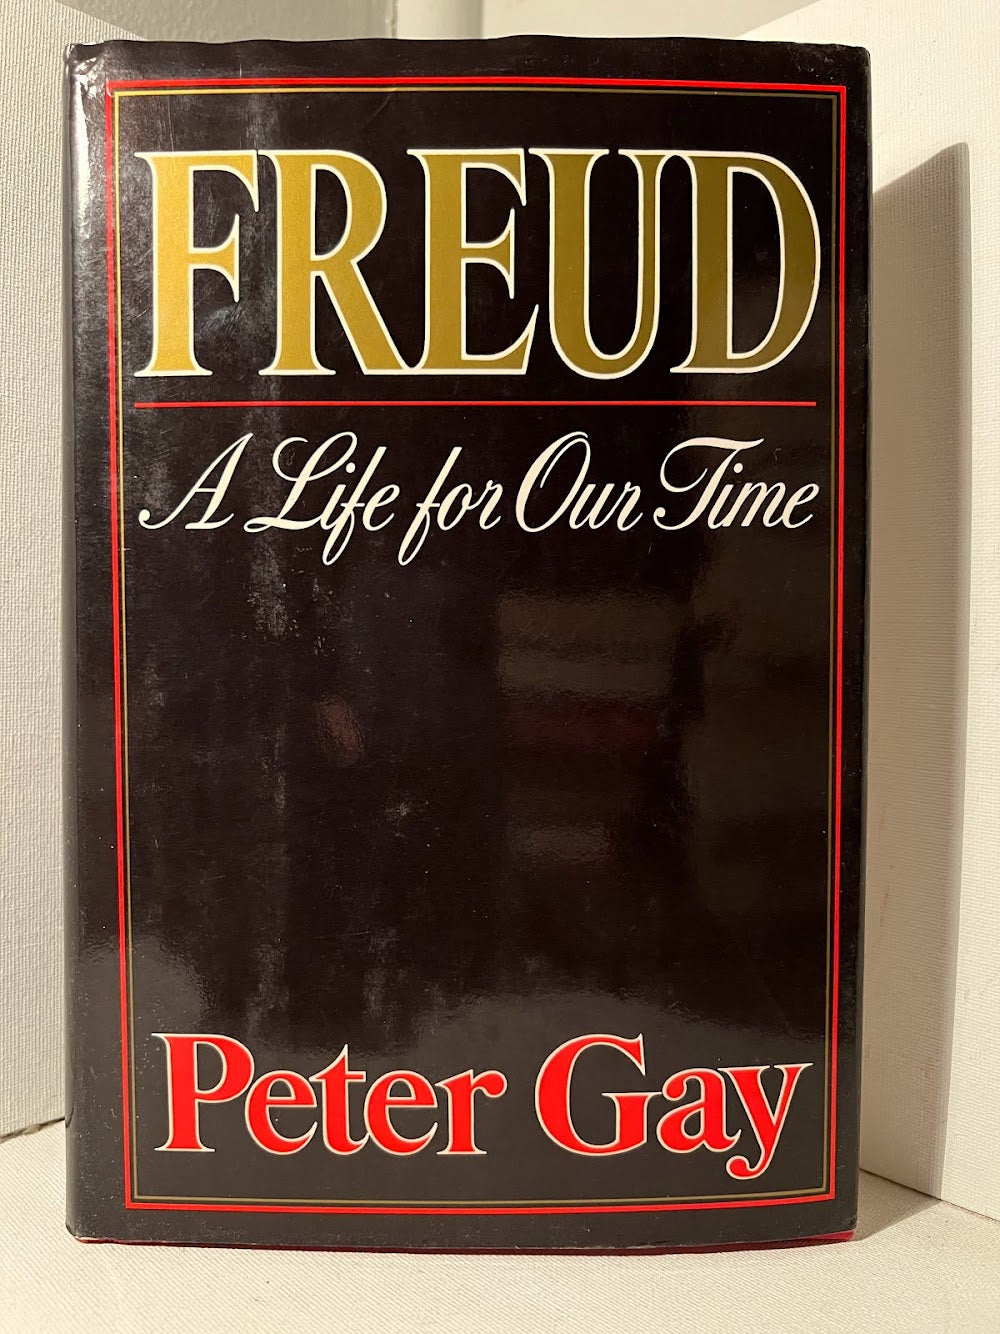 Freud: A Life For Our Time by Peter Gay